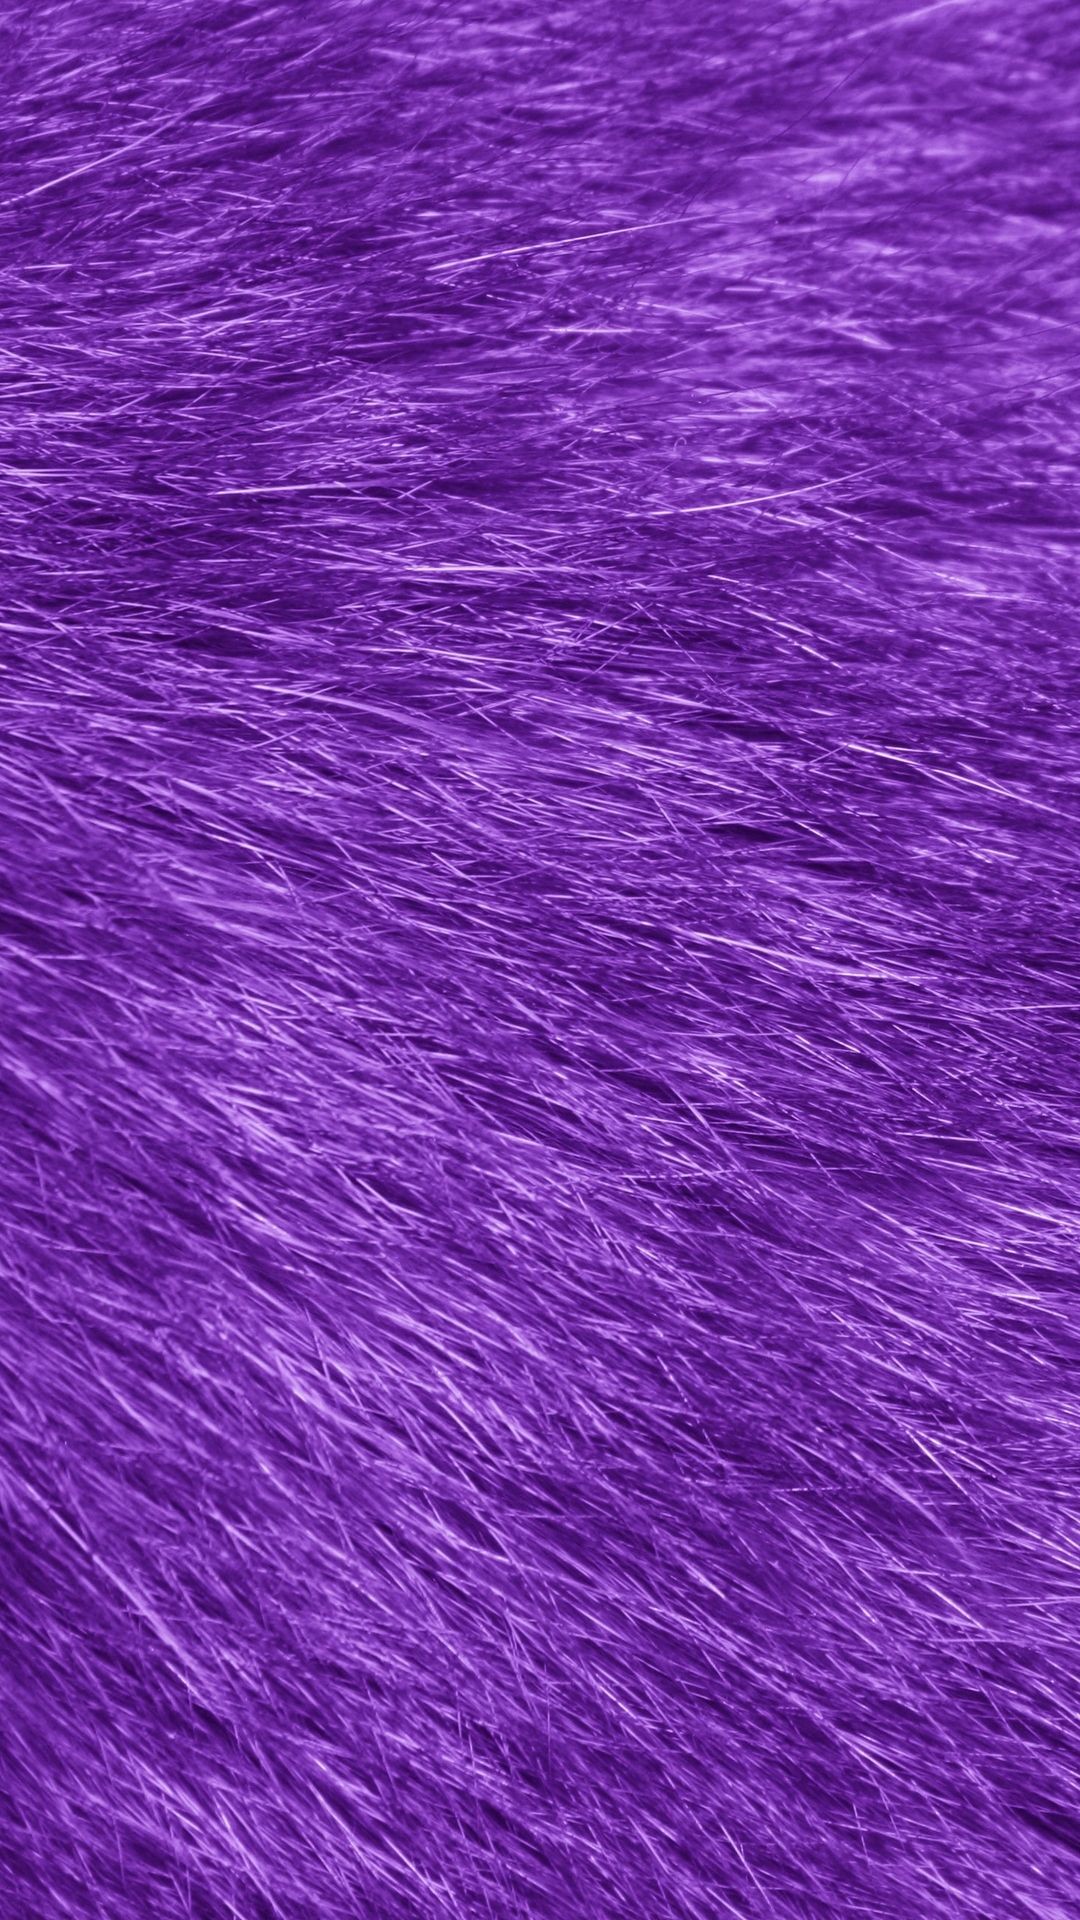 1080x1920 Purple Fur Texture - Tap to see more of the coolest texturized pattern  wallpapers! - @mobile9